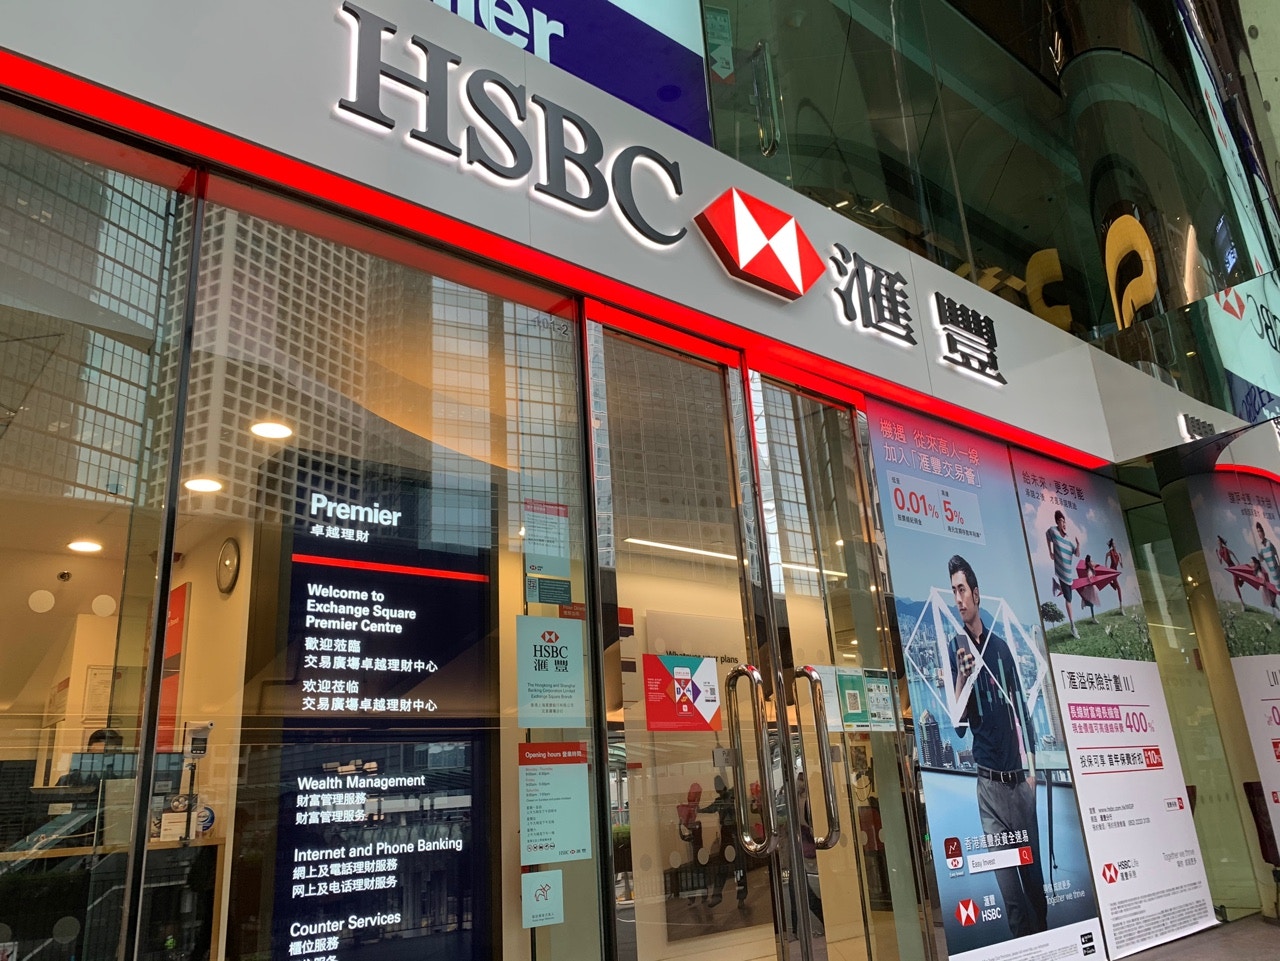 Hsbc Launched A 2 Year Fixed Rate Mortgage Plan Central Plains Mortgage Wang Meifeng Let Users 6632